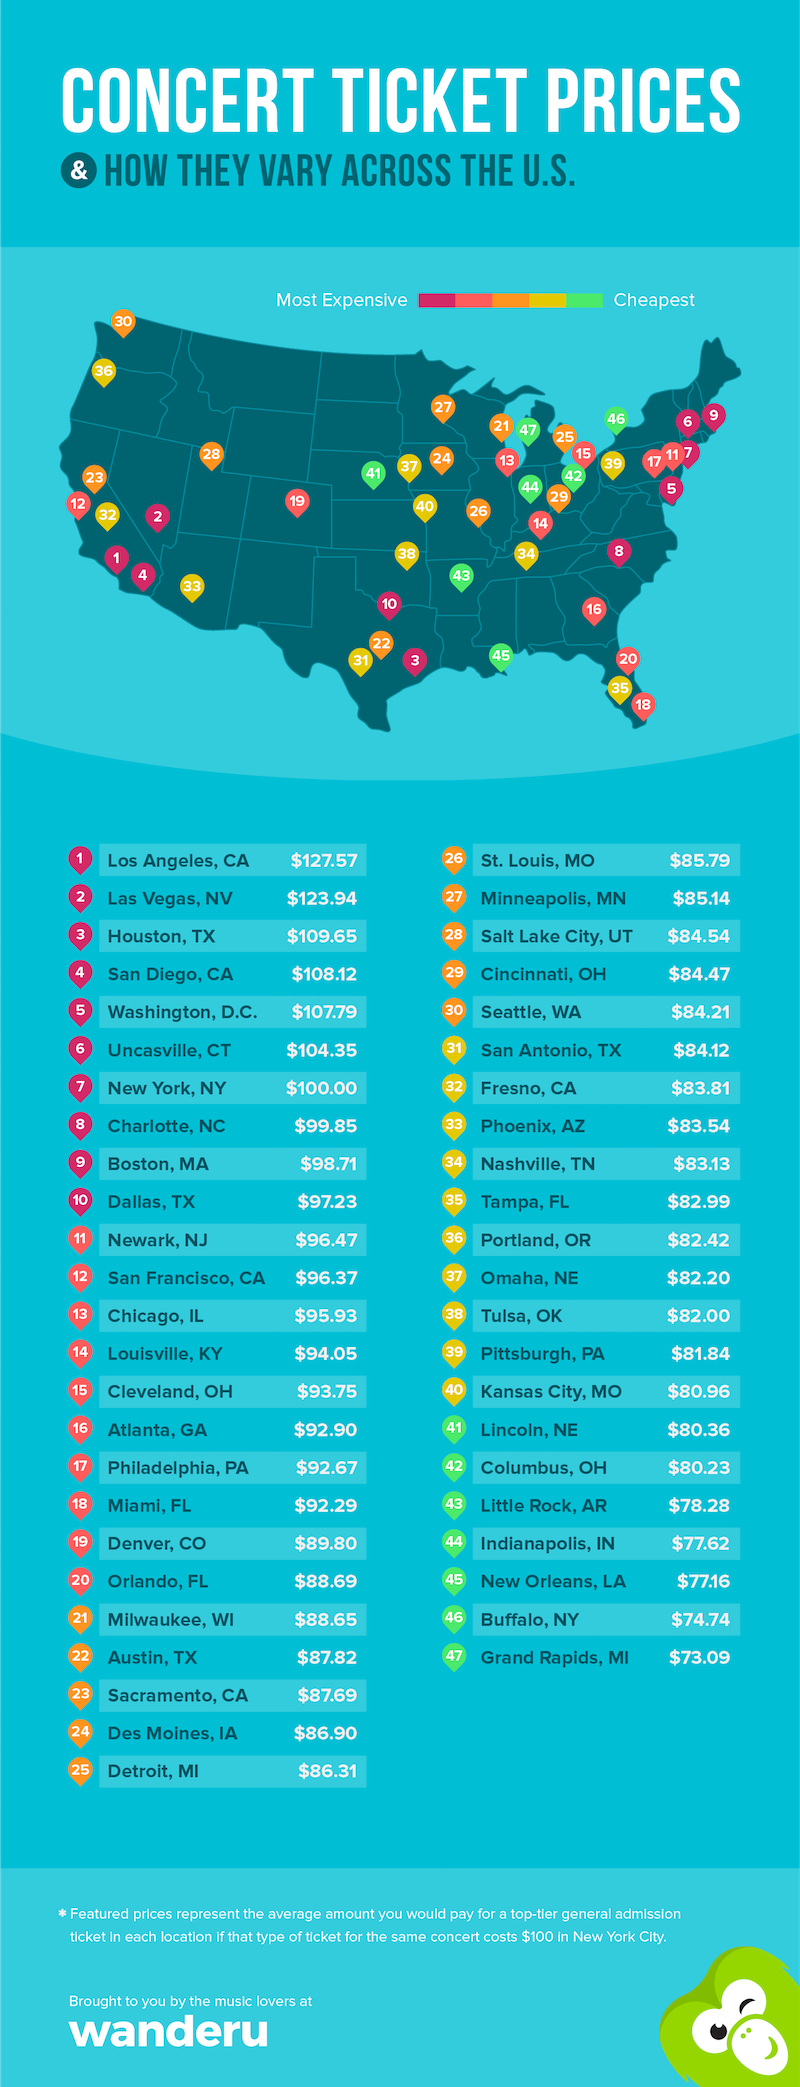 concert ticket prices difference across usa Heres how concert ticket prices vary across the US